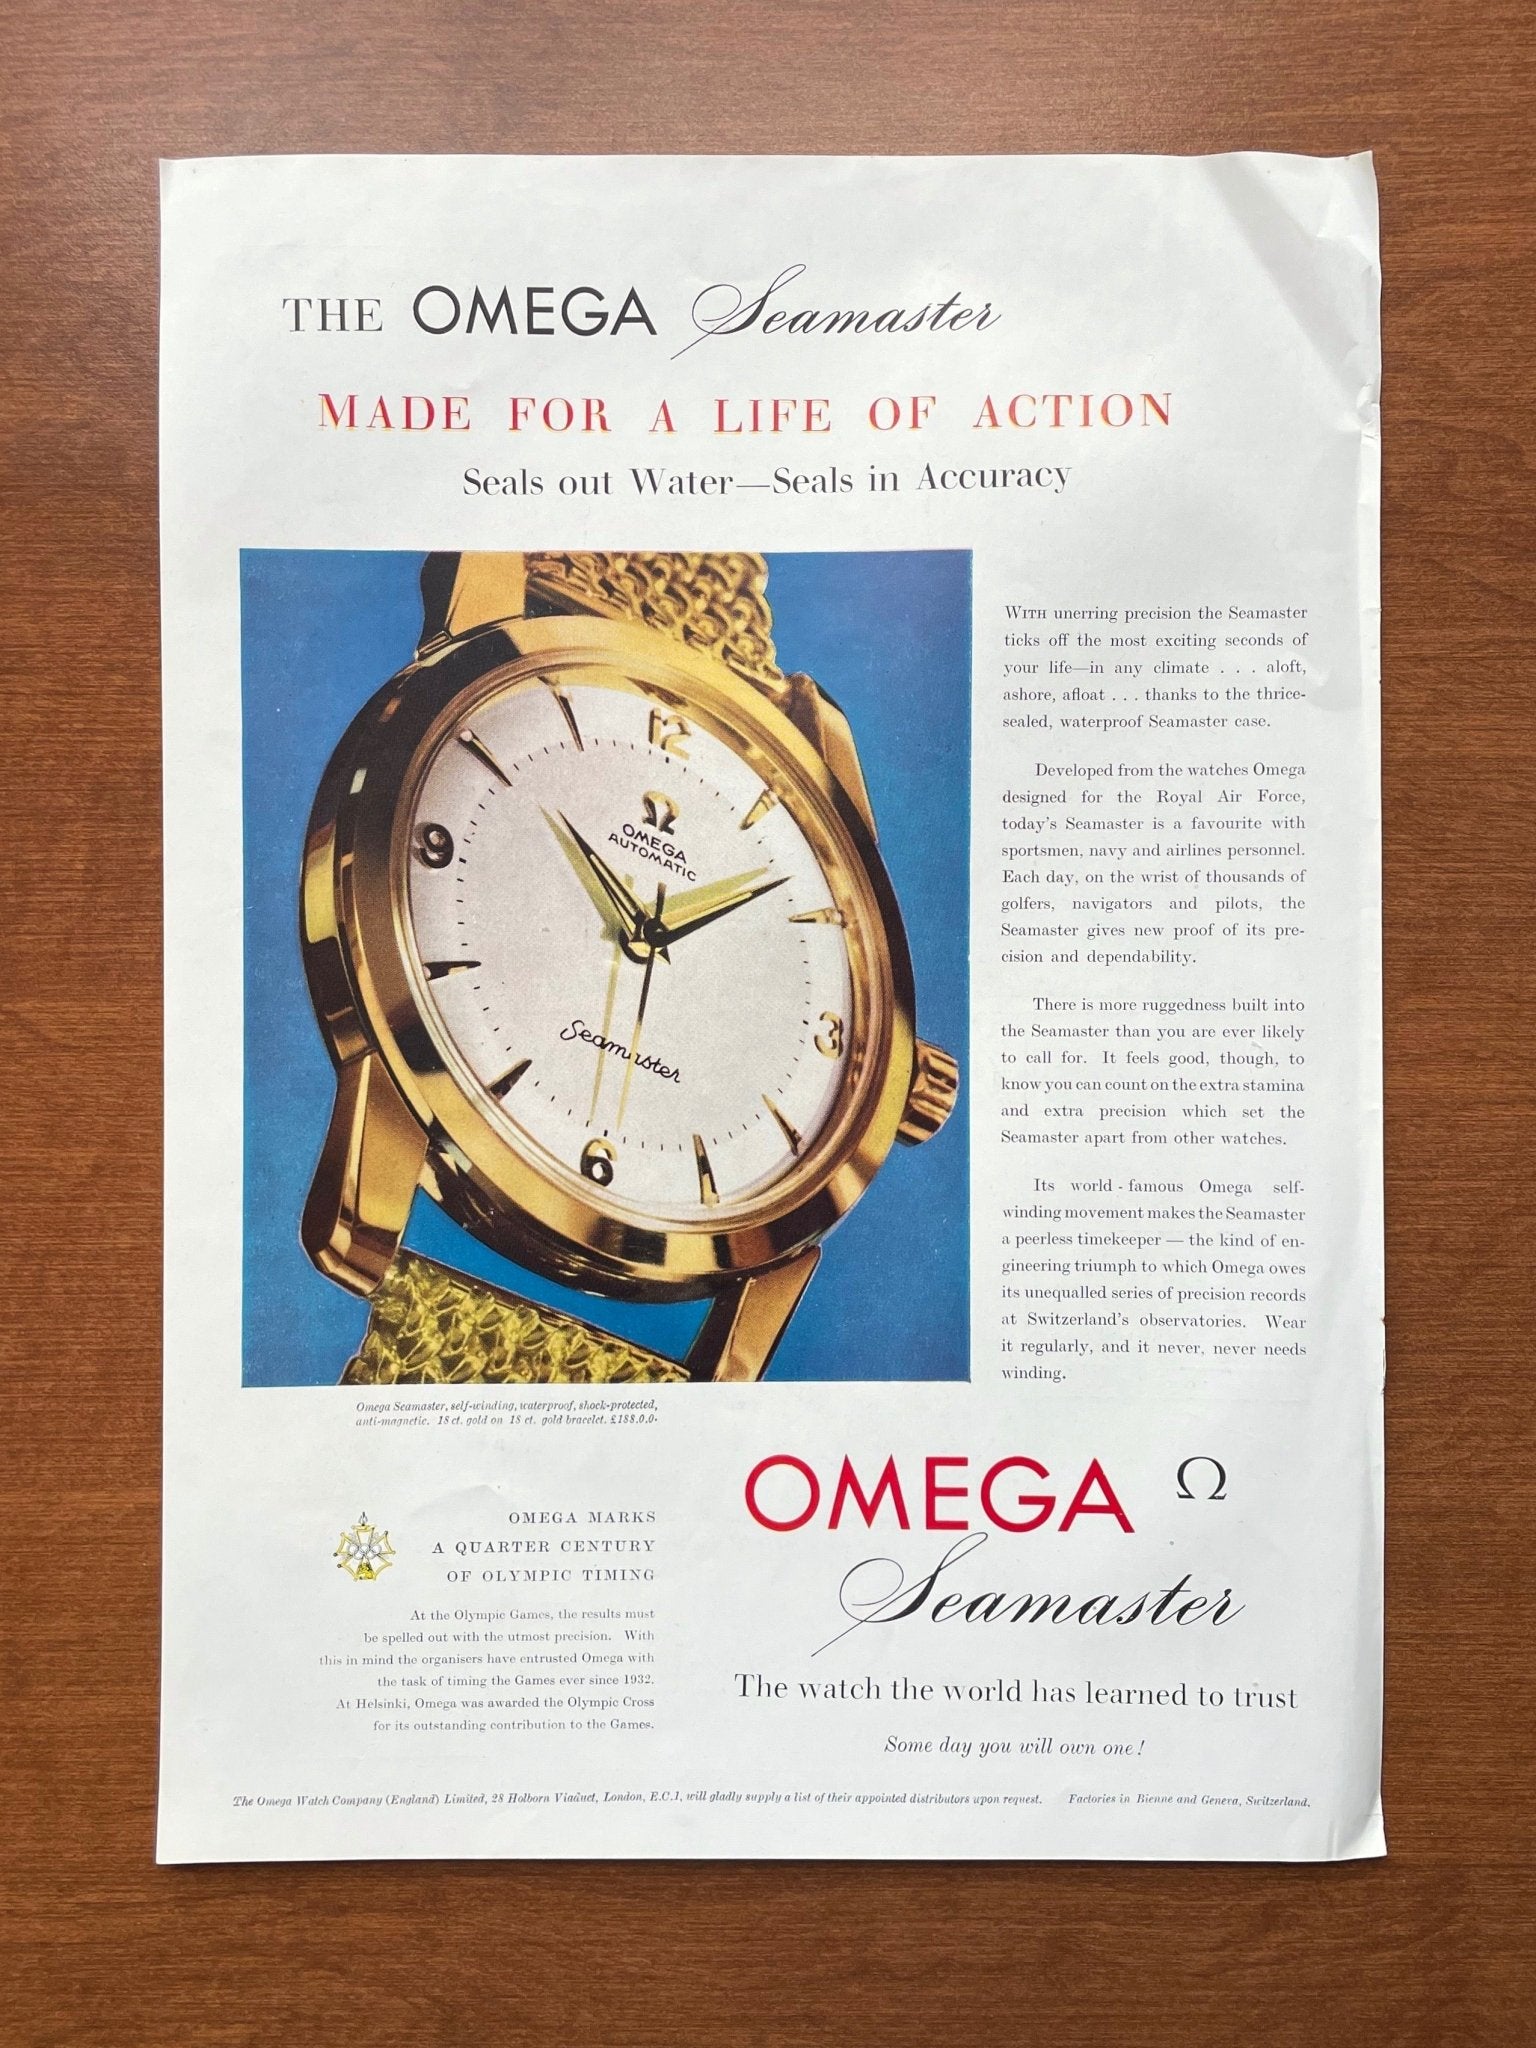 1957 Omega Seamaster "Made for a Life of Action" Advertisement